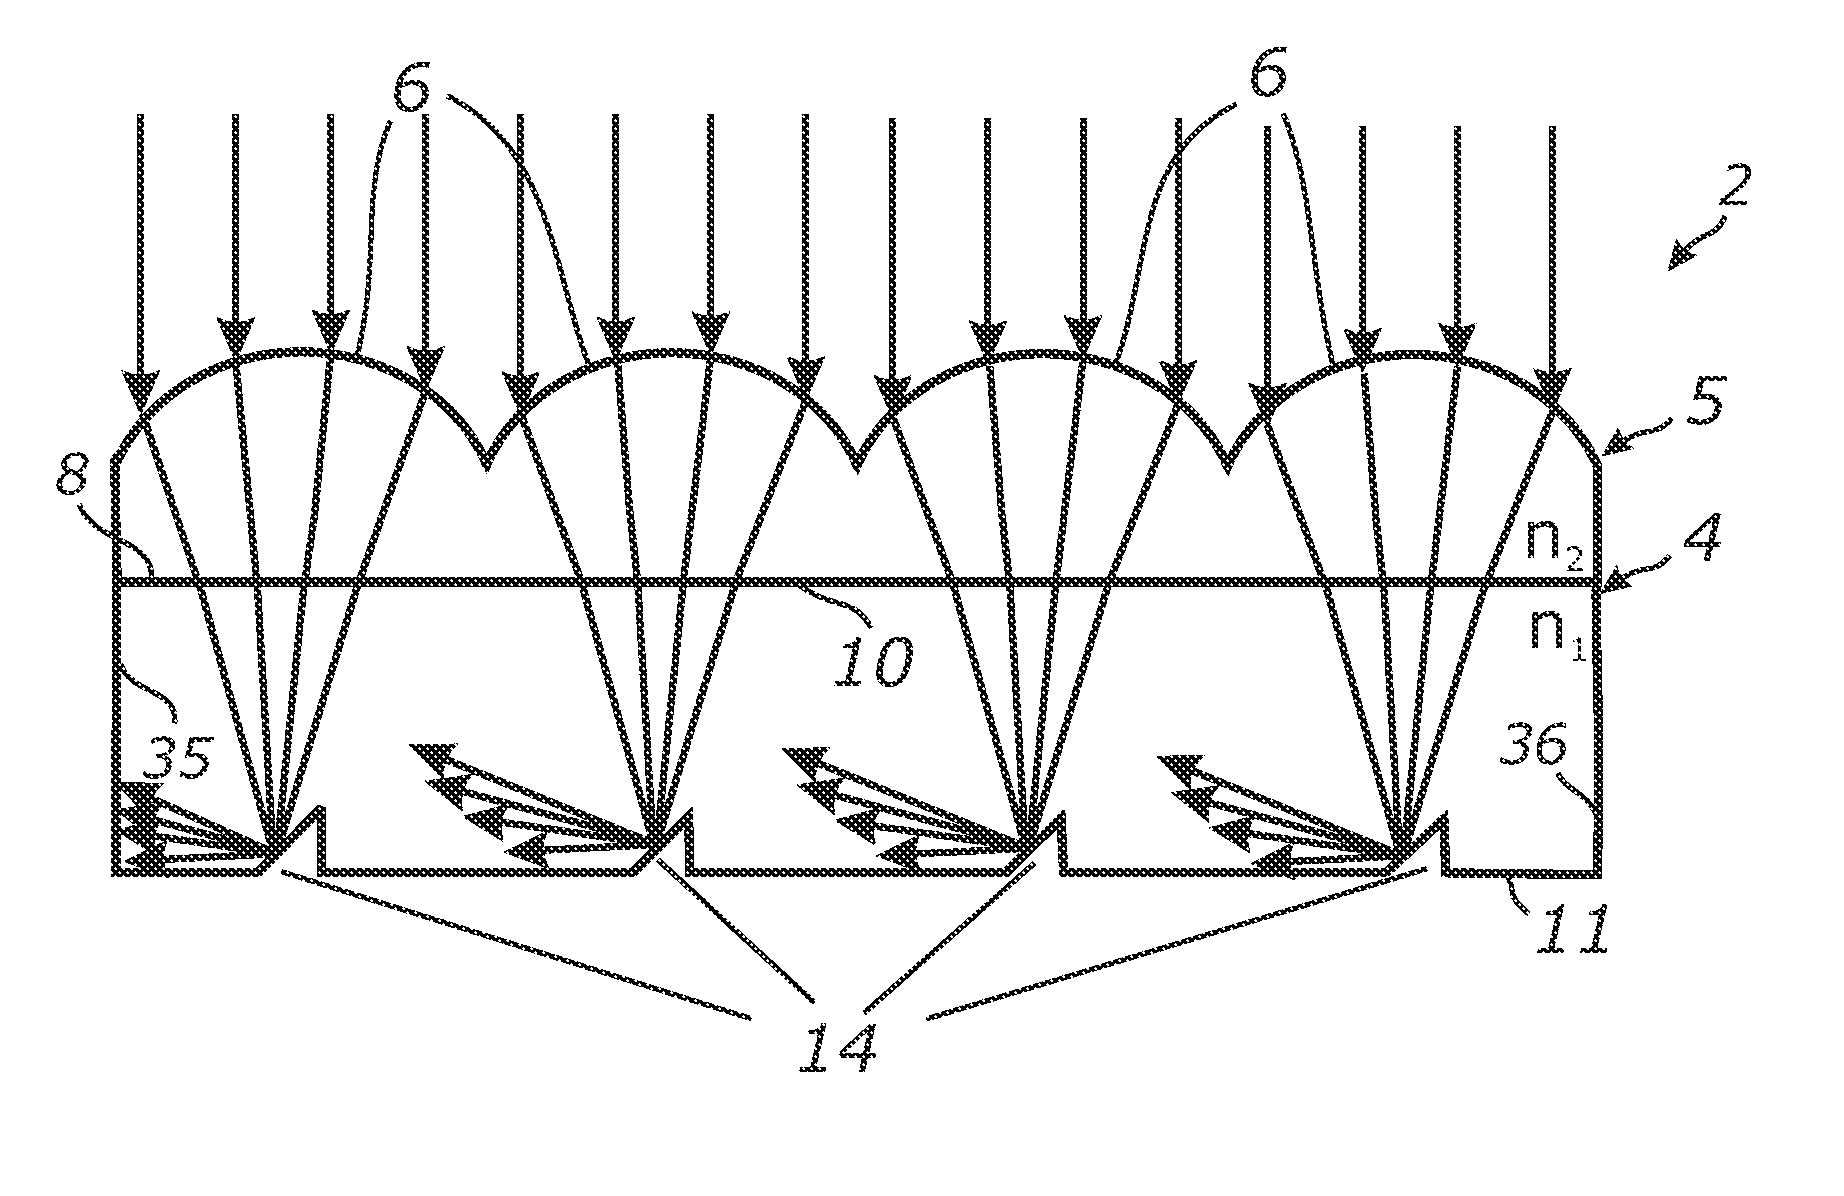 Light collection and illumination systems employing planar waveguide